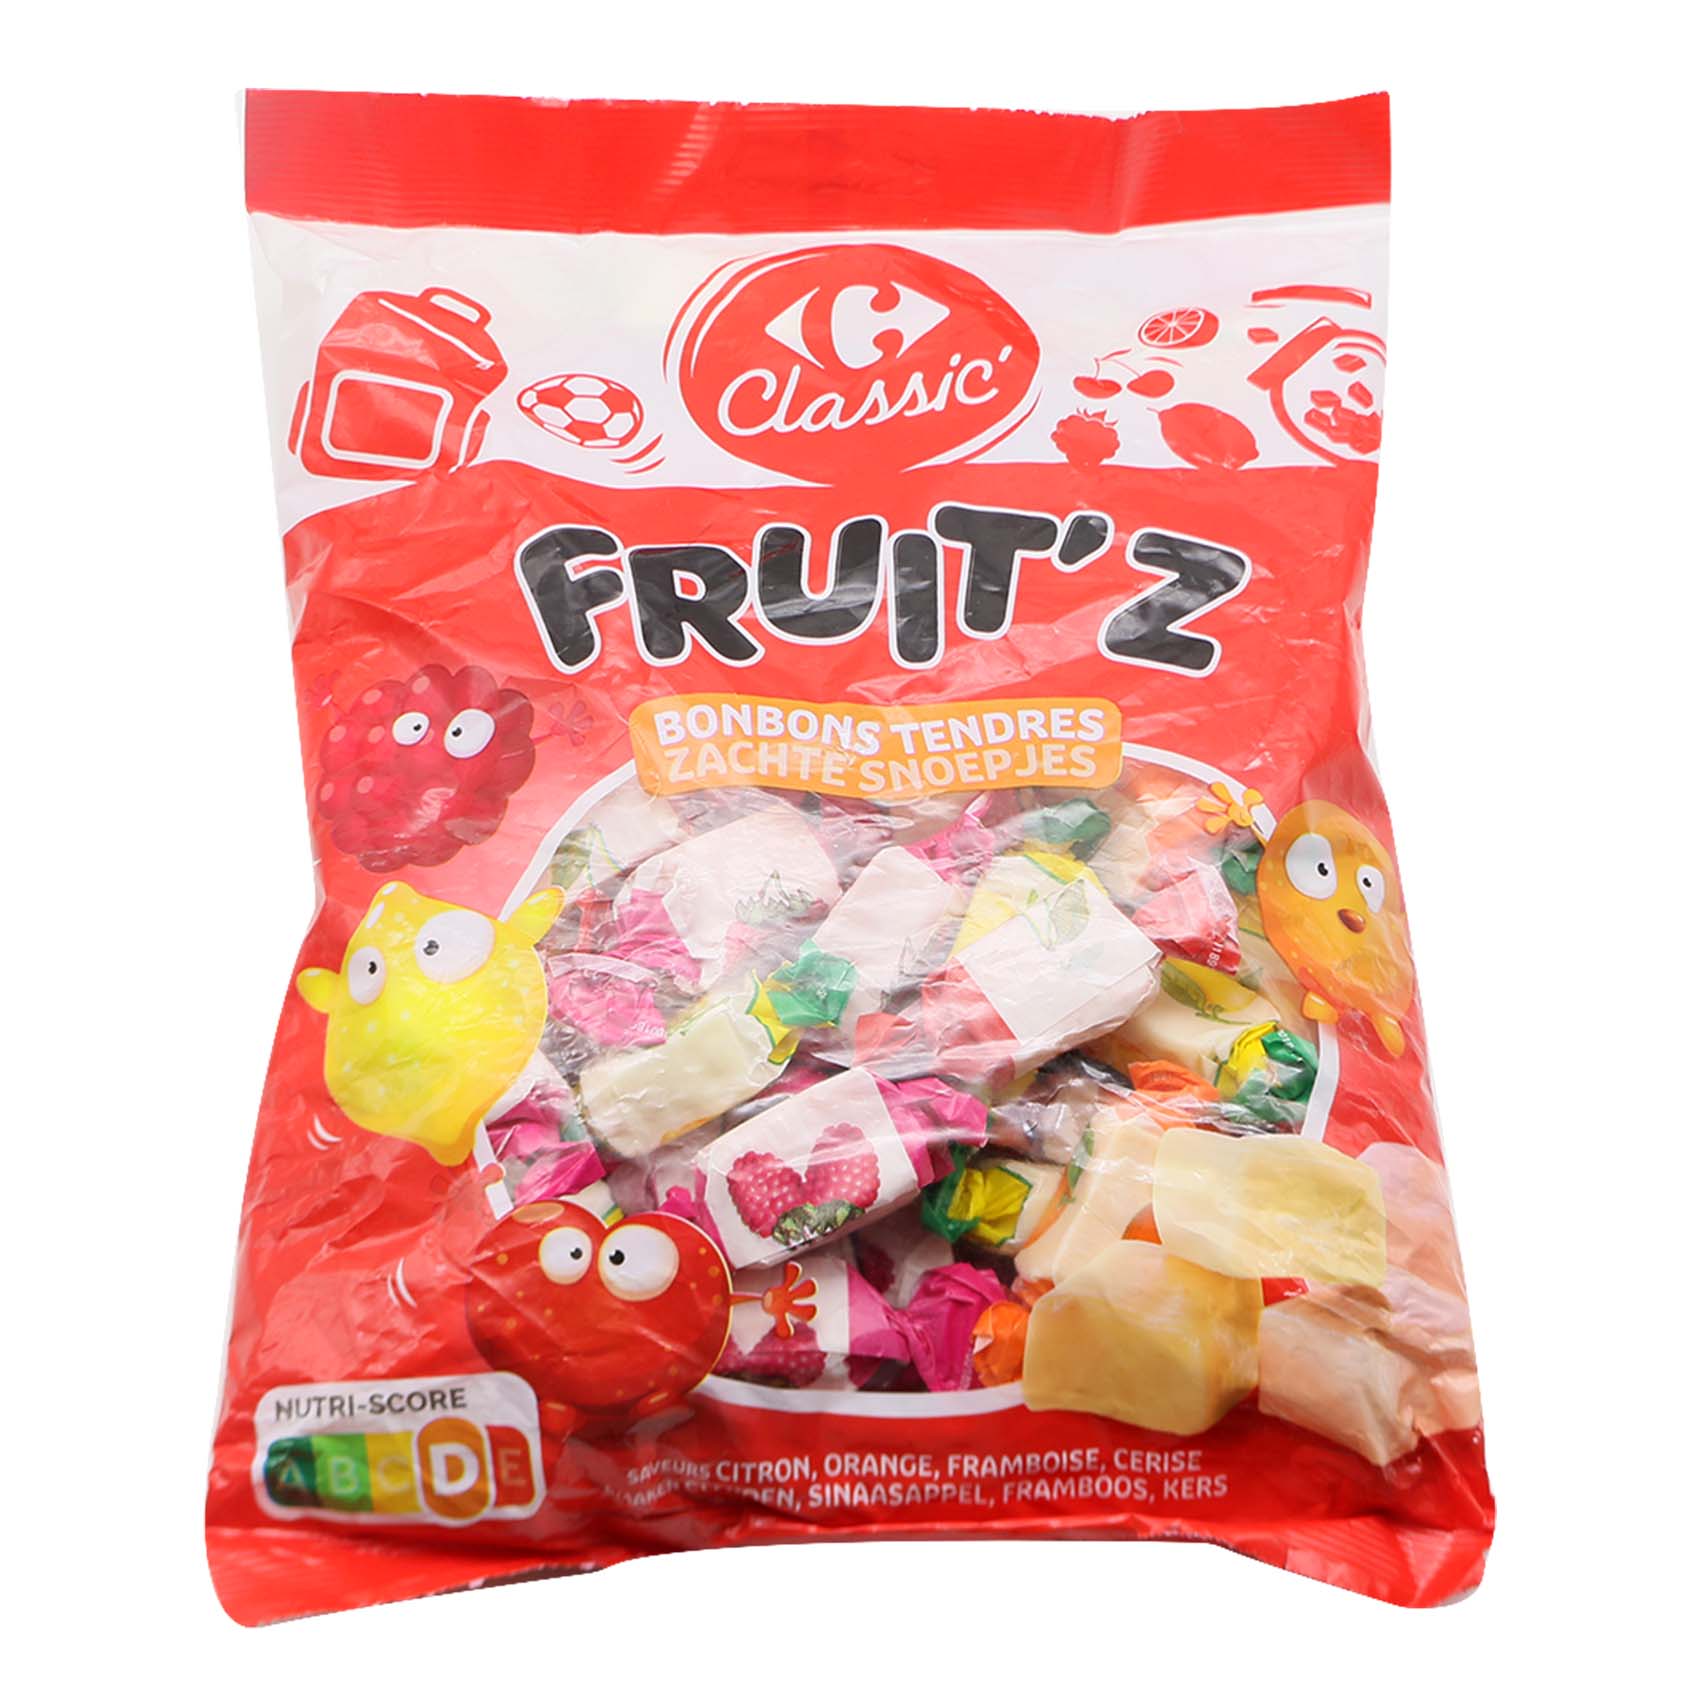 Carrefour Bonbons Tendres Soft Candy 500g